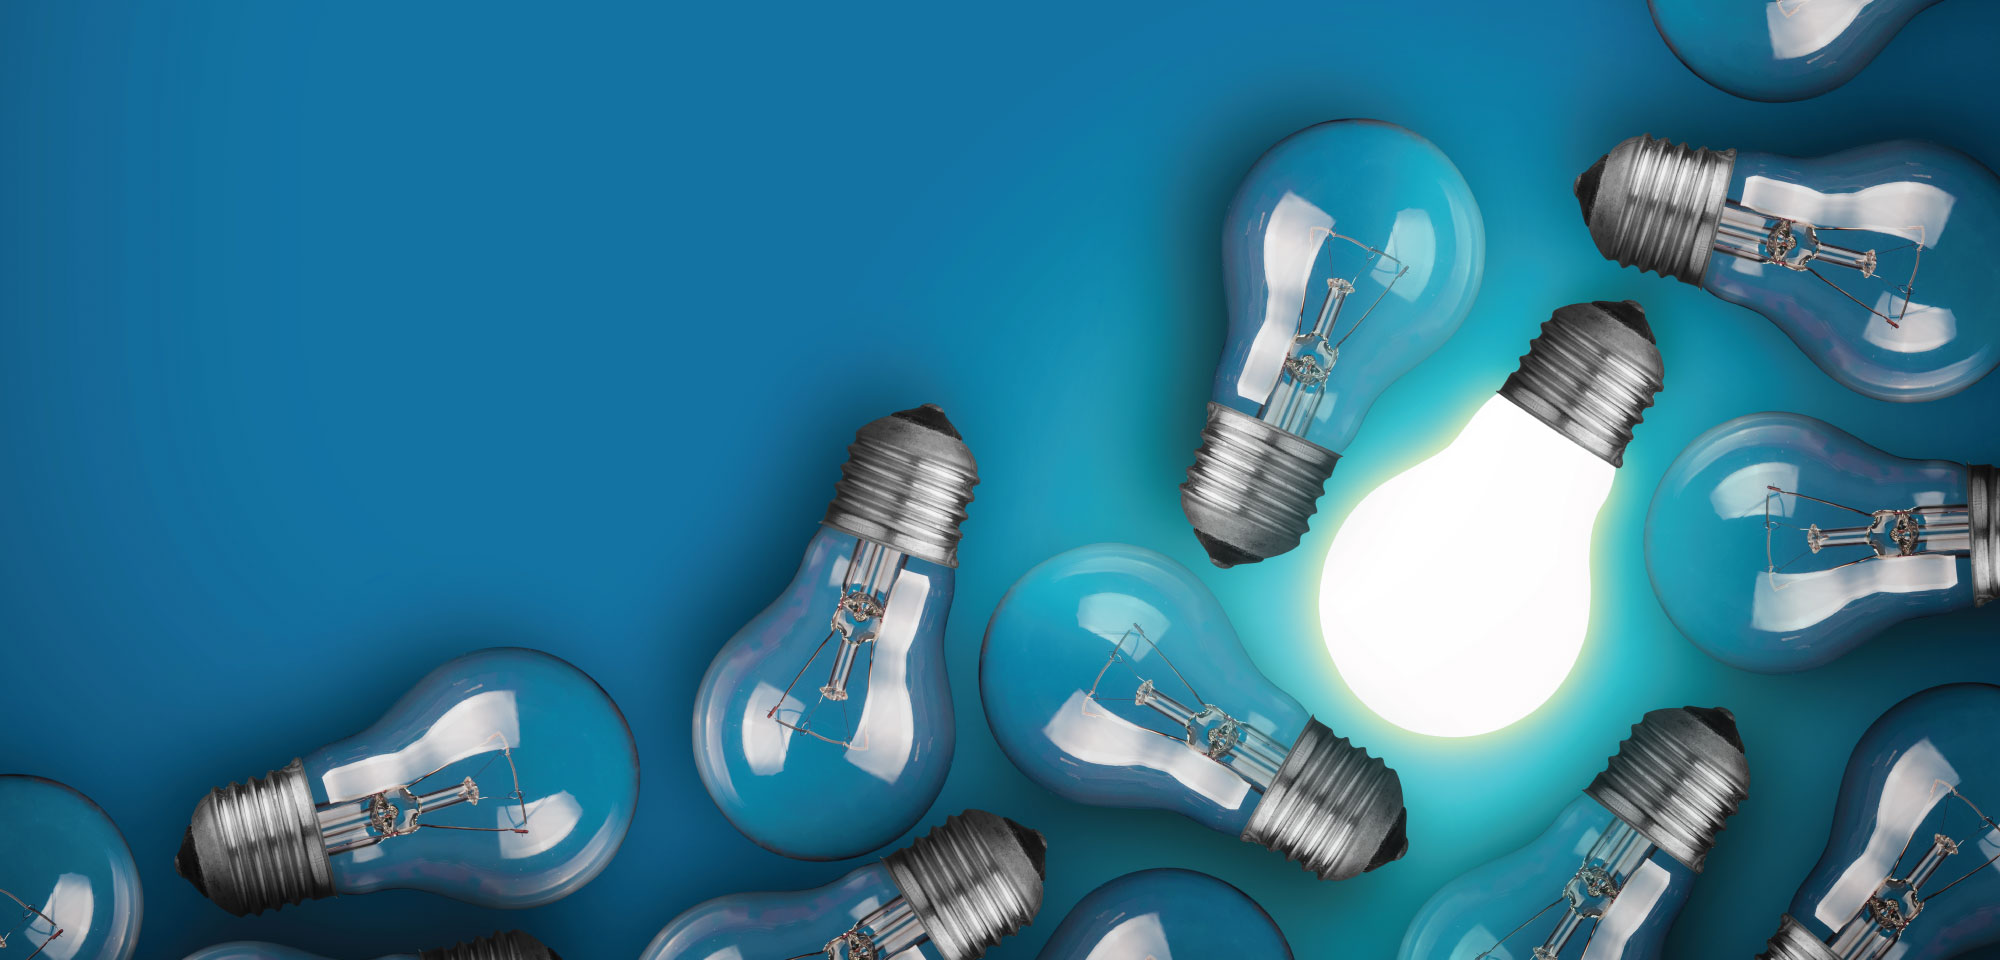 The best energy-efficient light bulbs for your home